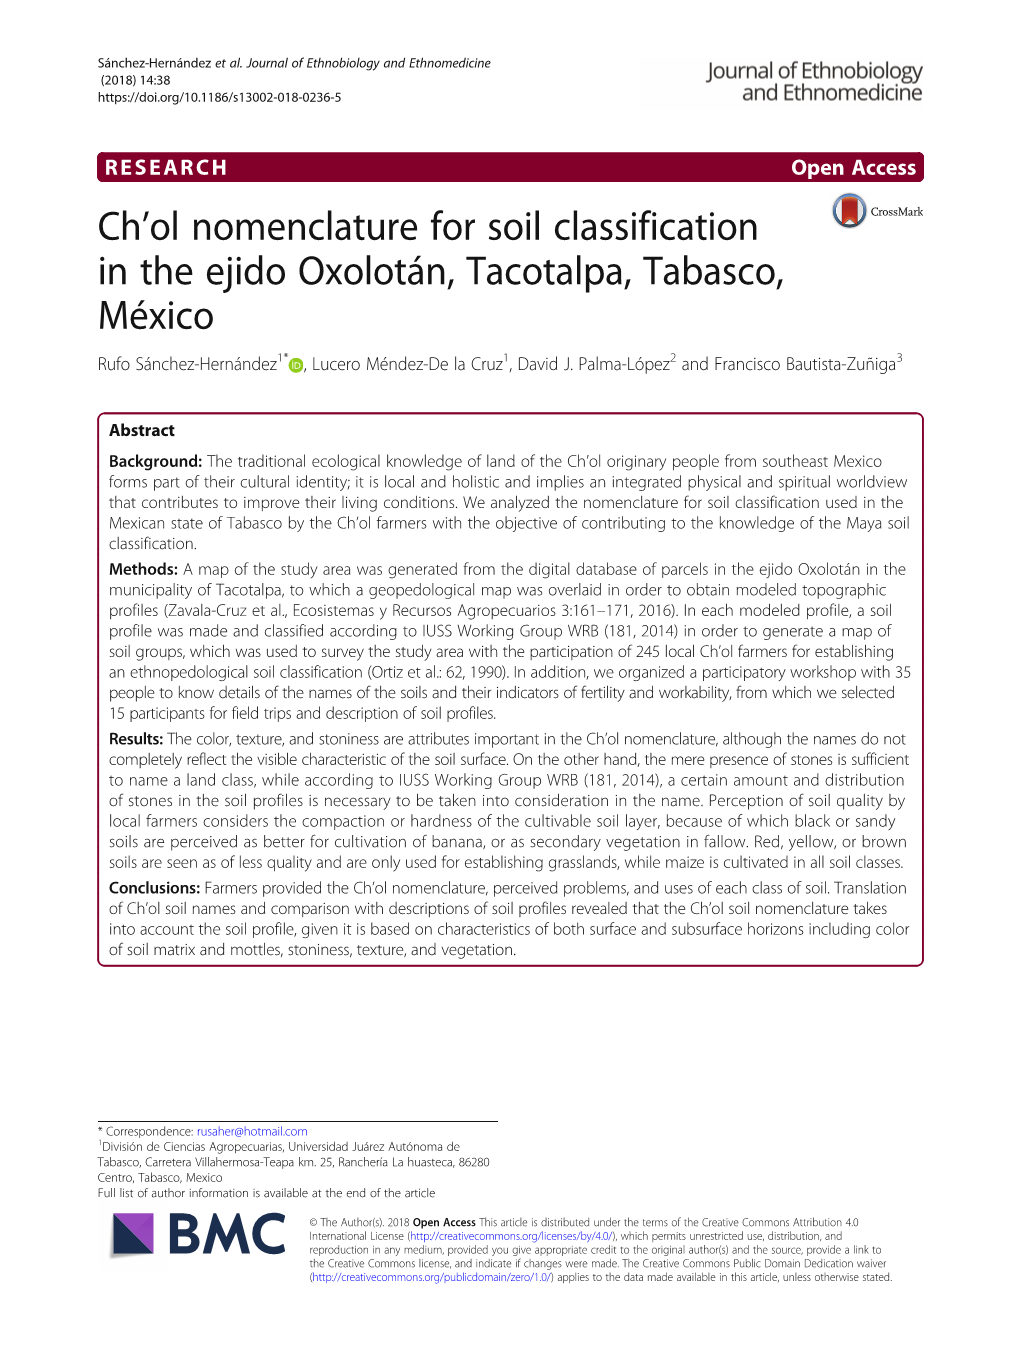 Ch'ol Nomenclature for Soil Classification in the Ejido Oxolotán